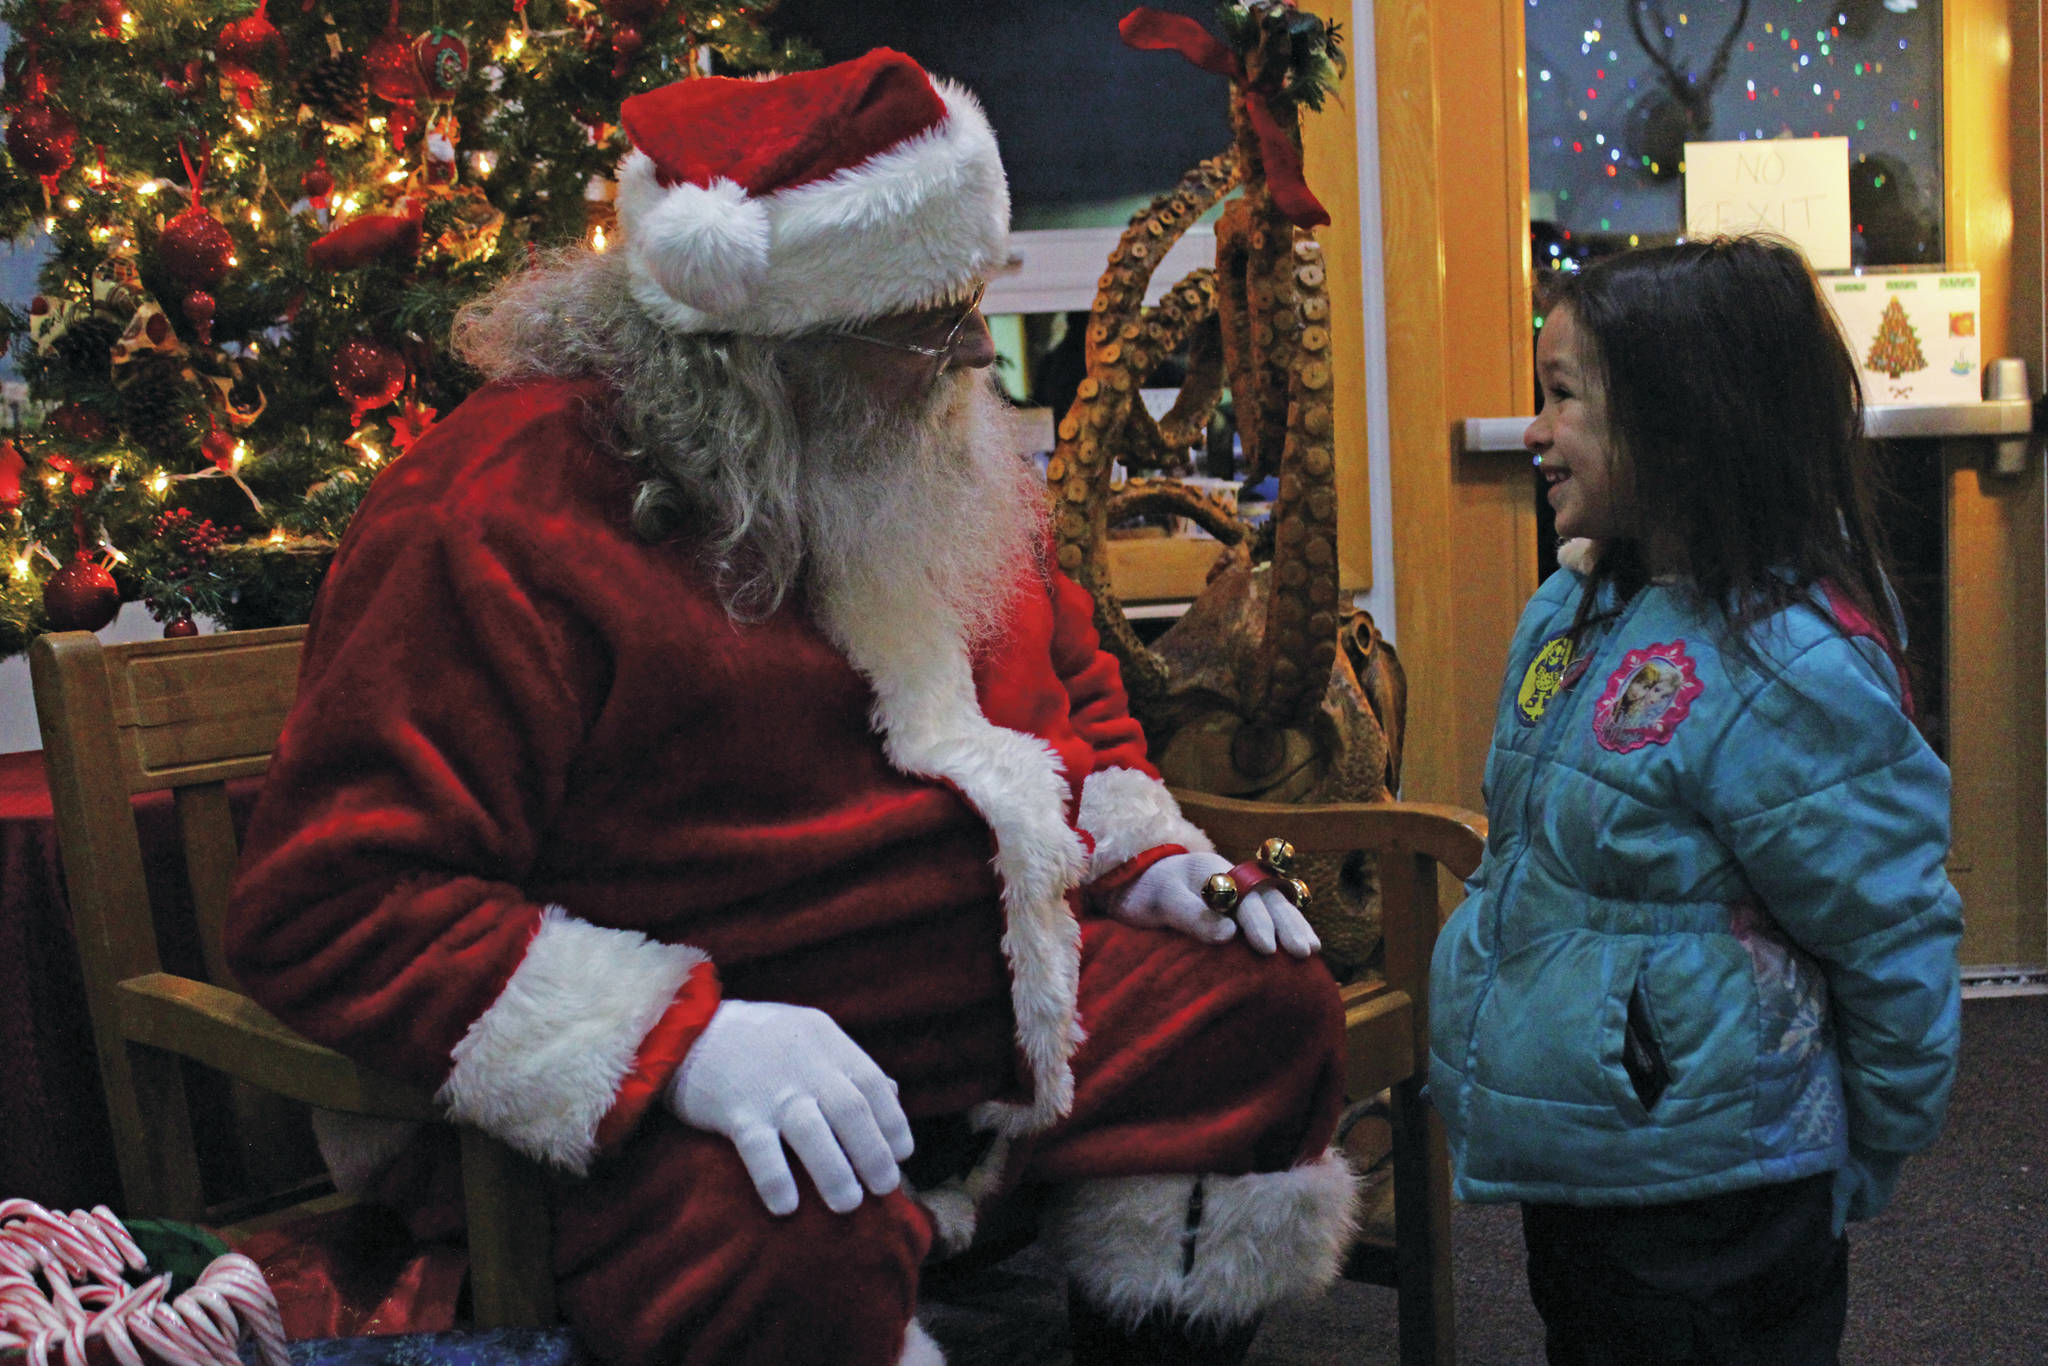 Emma Rader, 6, talks to Santa Claus before getting her photo taken with him at the annual Holiday Tree Lighting event put on by the Homer Chamber of Commerce and Visitor Center on Thursday, Dec. 5, 2019 at the chamber in Homer, Alaska. (Photo by Megan Pacer/Homer News)